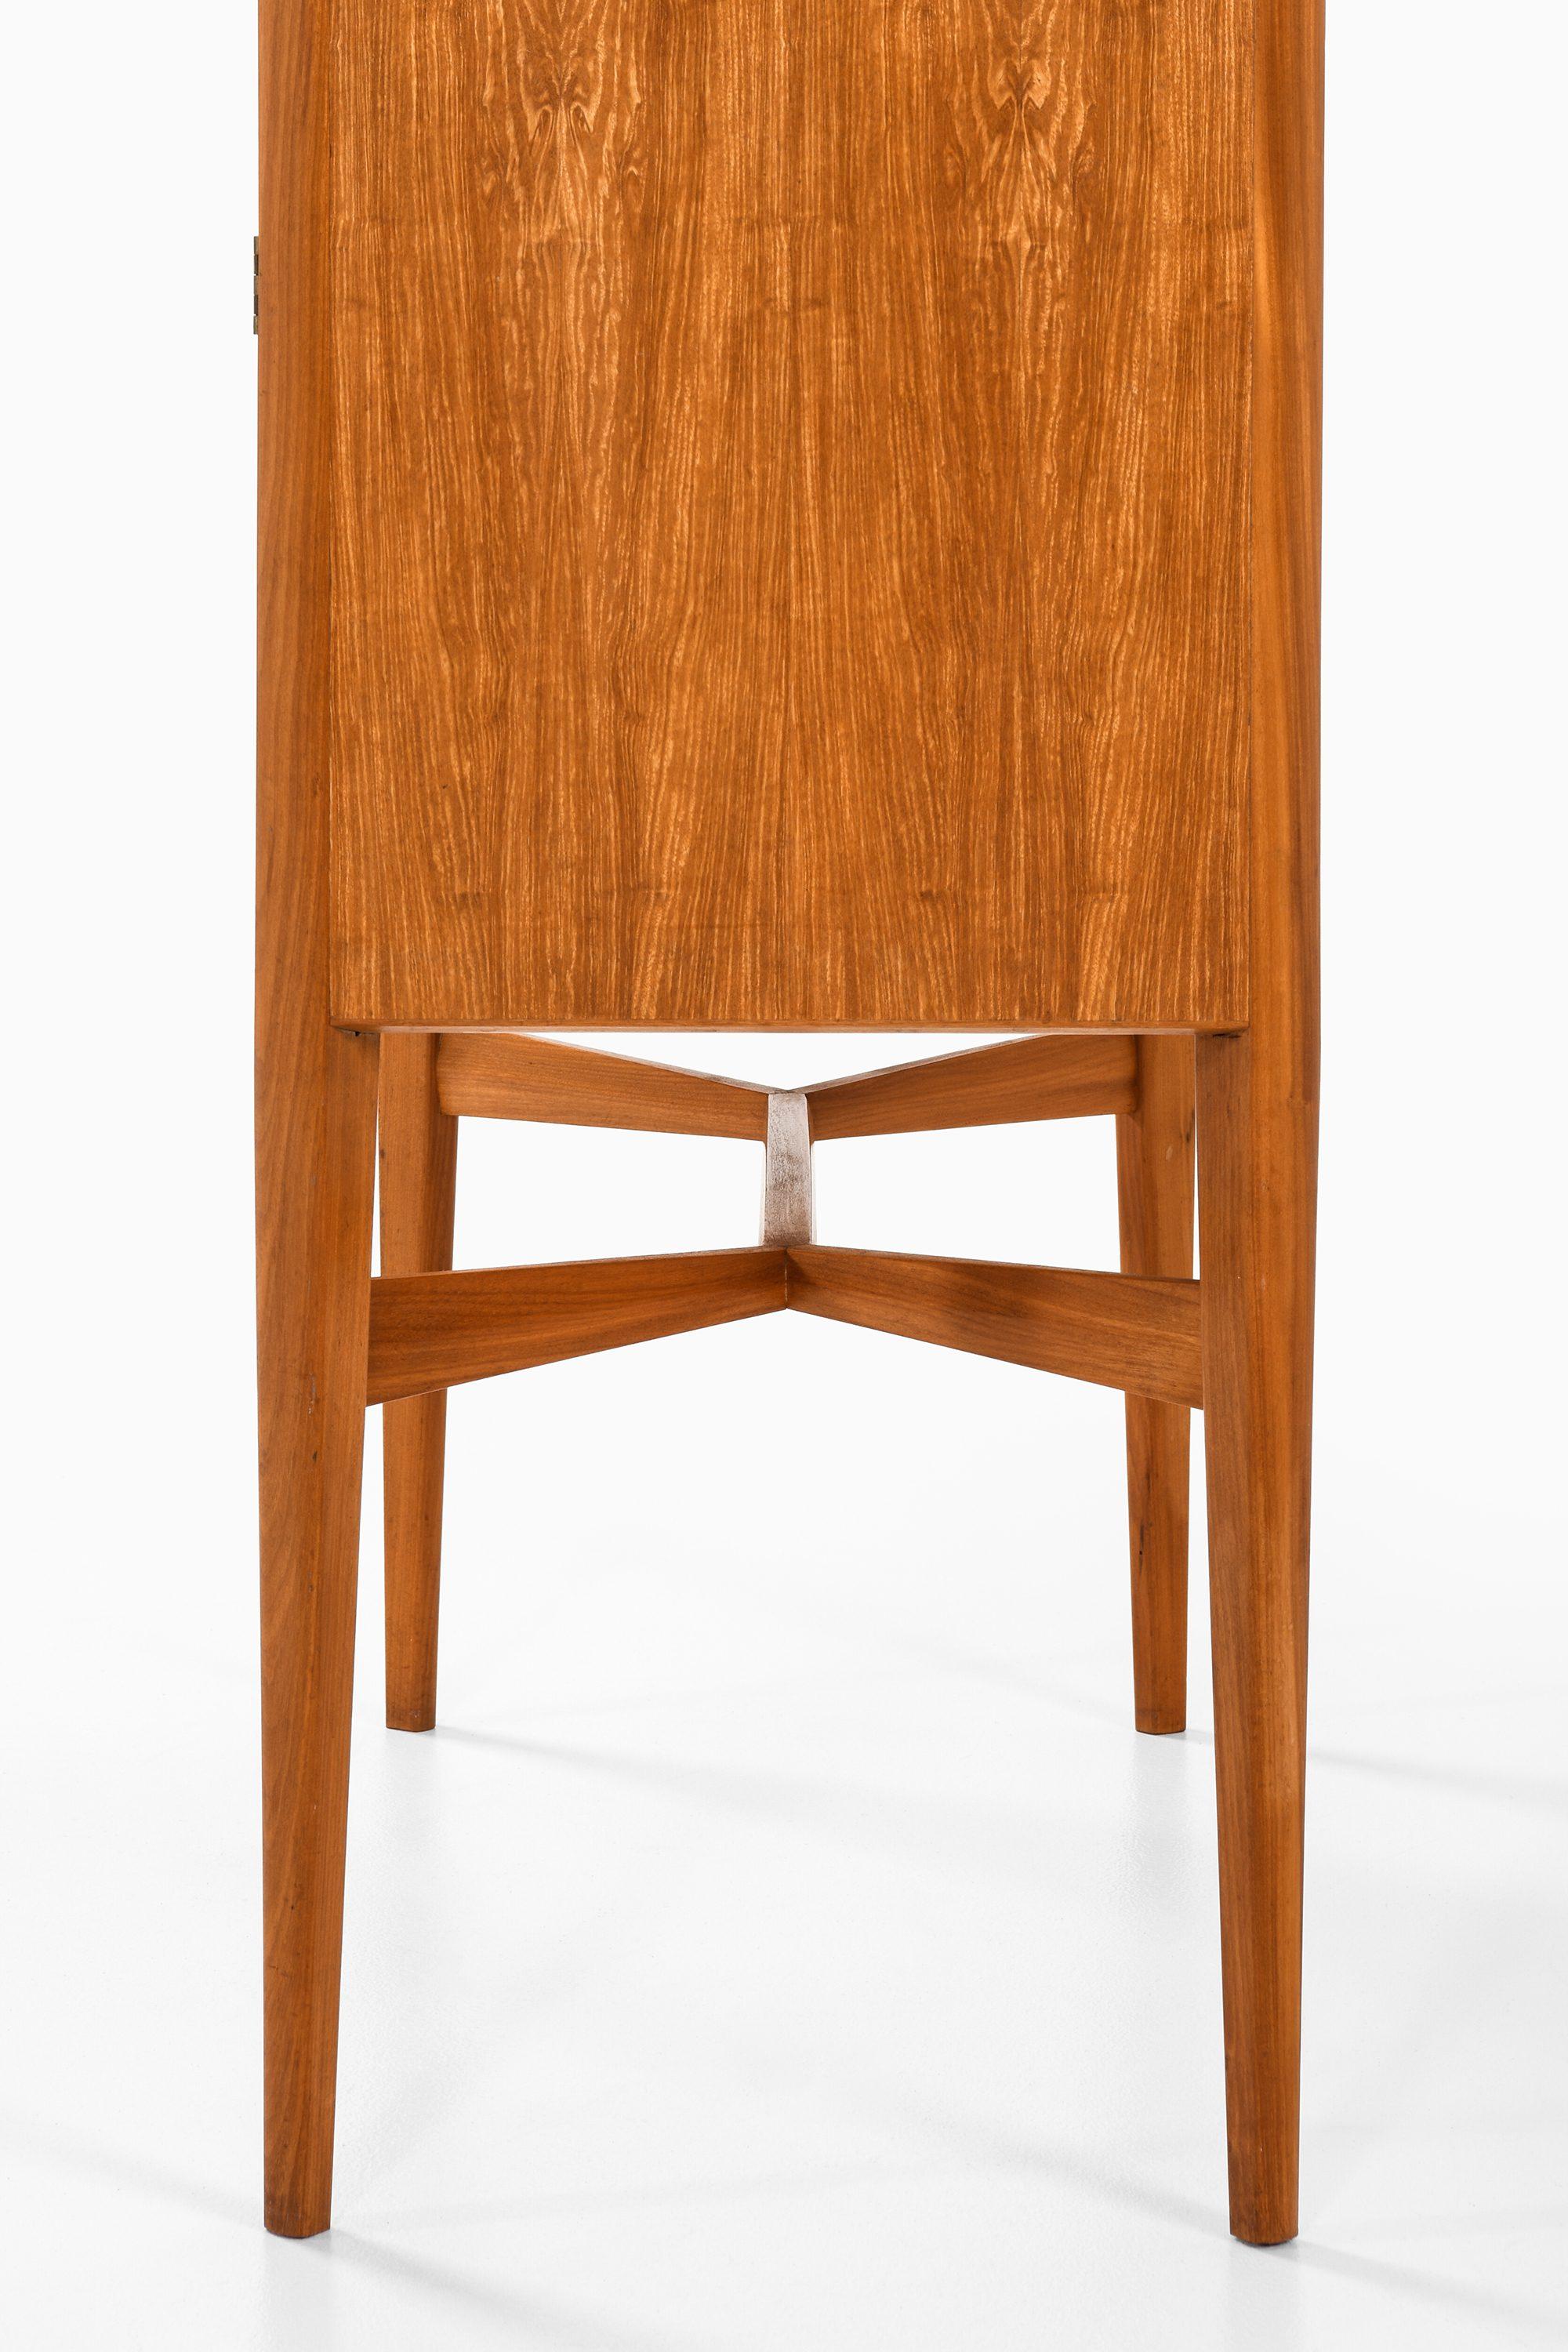 20th Century Freestanding Cabinet in Teak by Carl-Axel Acking, 1940s For Sale